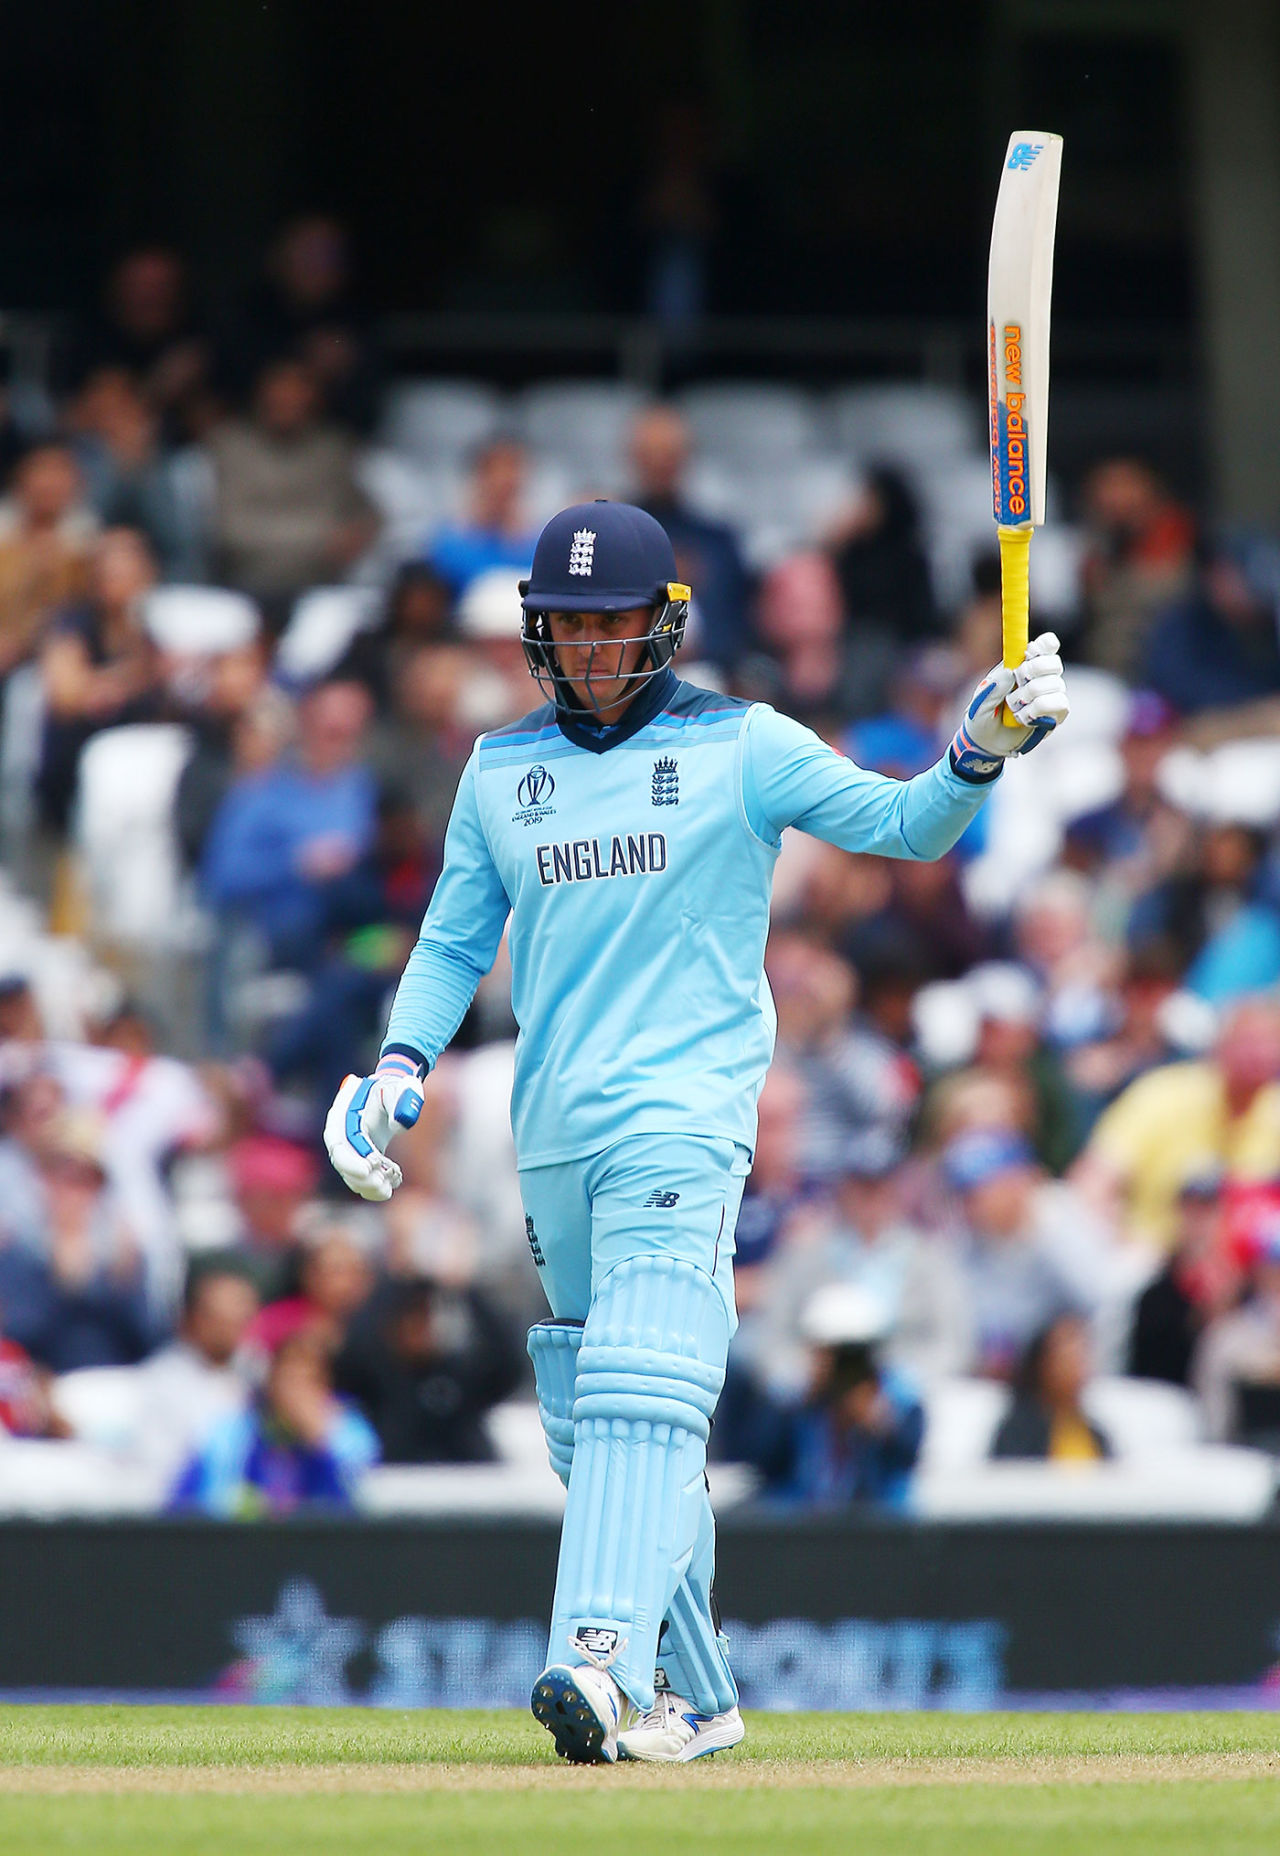 Jason Roy brings up his half-century, England v Afghanistan, World Cup 2019 warm-ups, The Oval, May 27, 2019